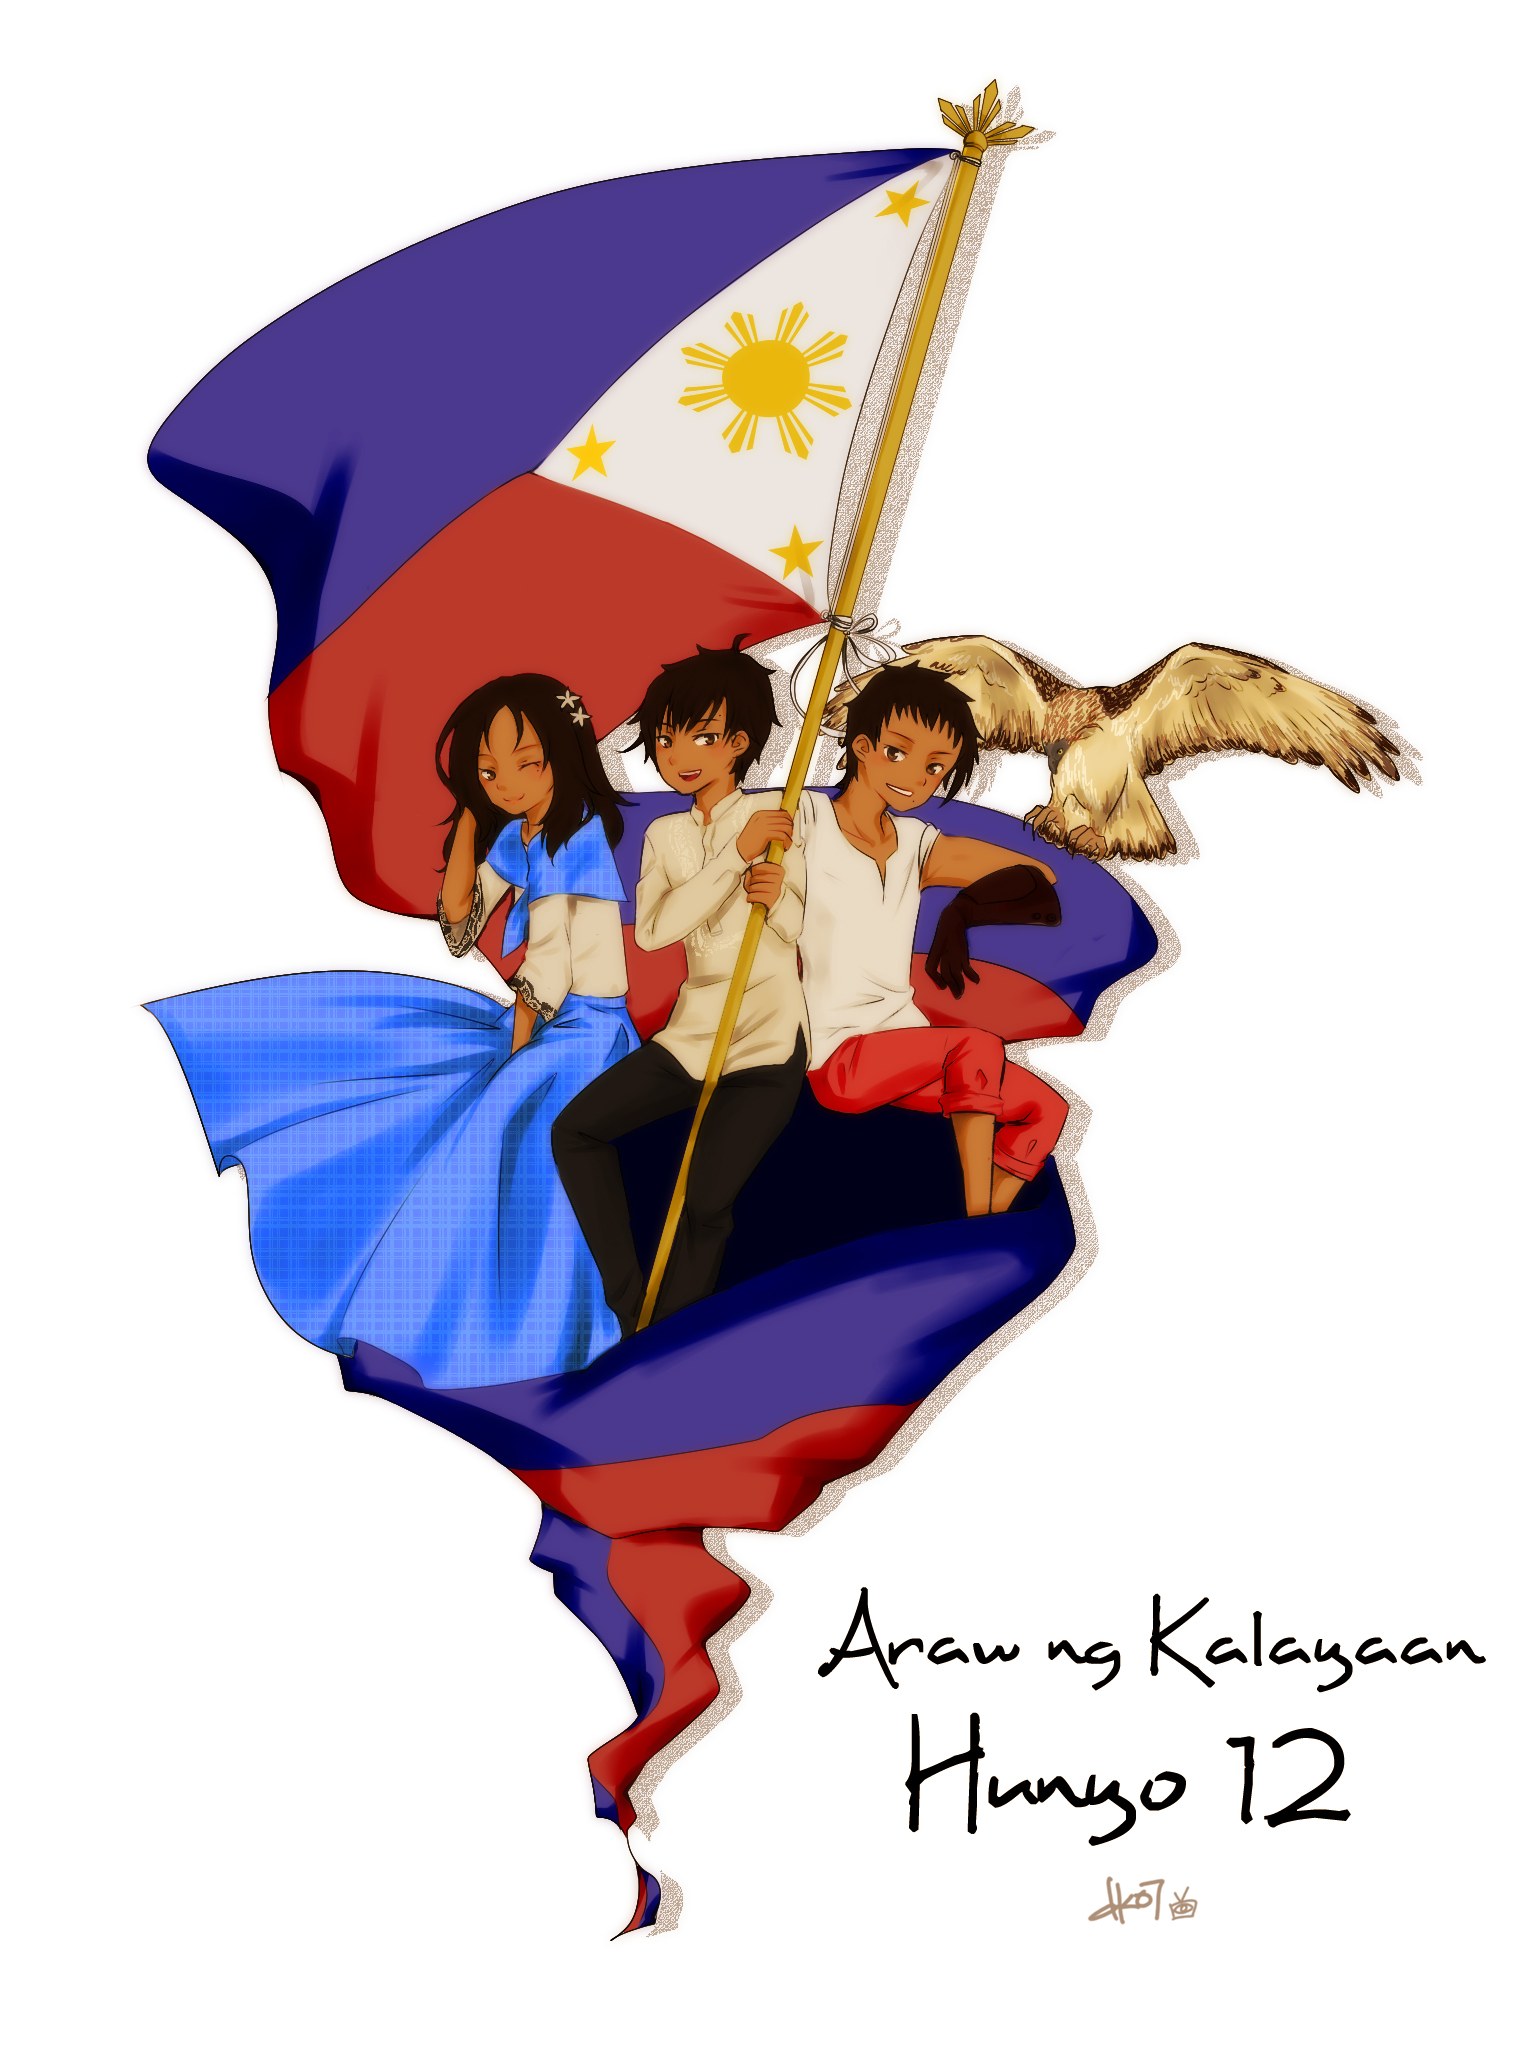 Philippine Independence Day Easy Kalayaan Poster Drawing - Vector Stock